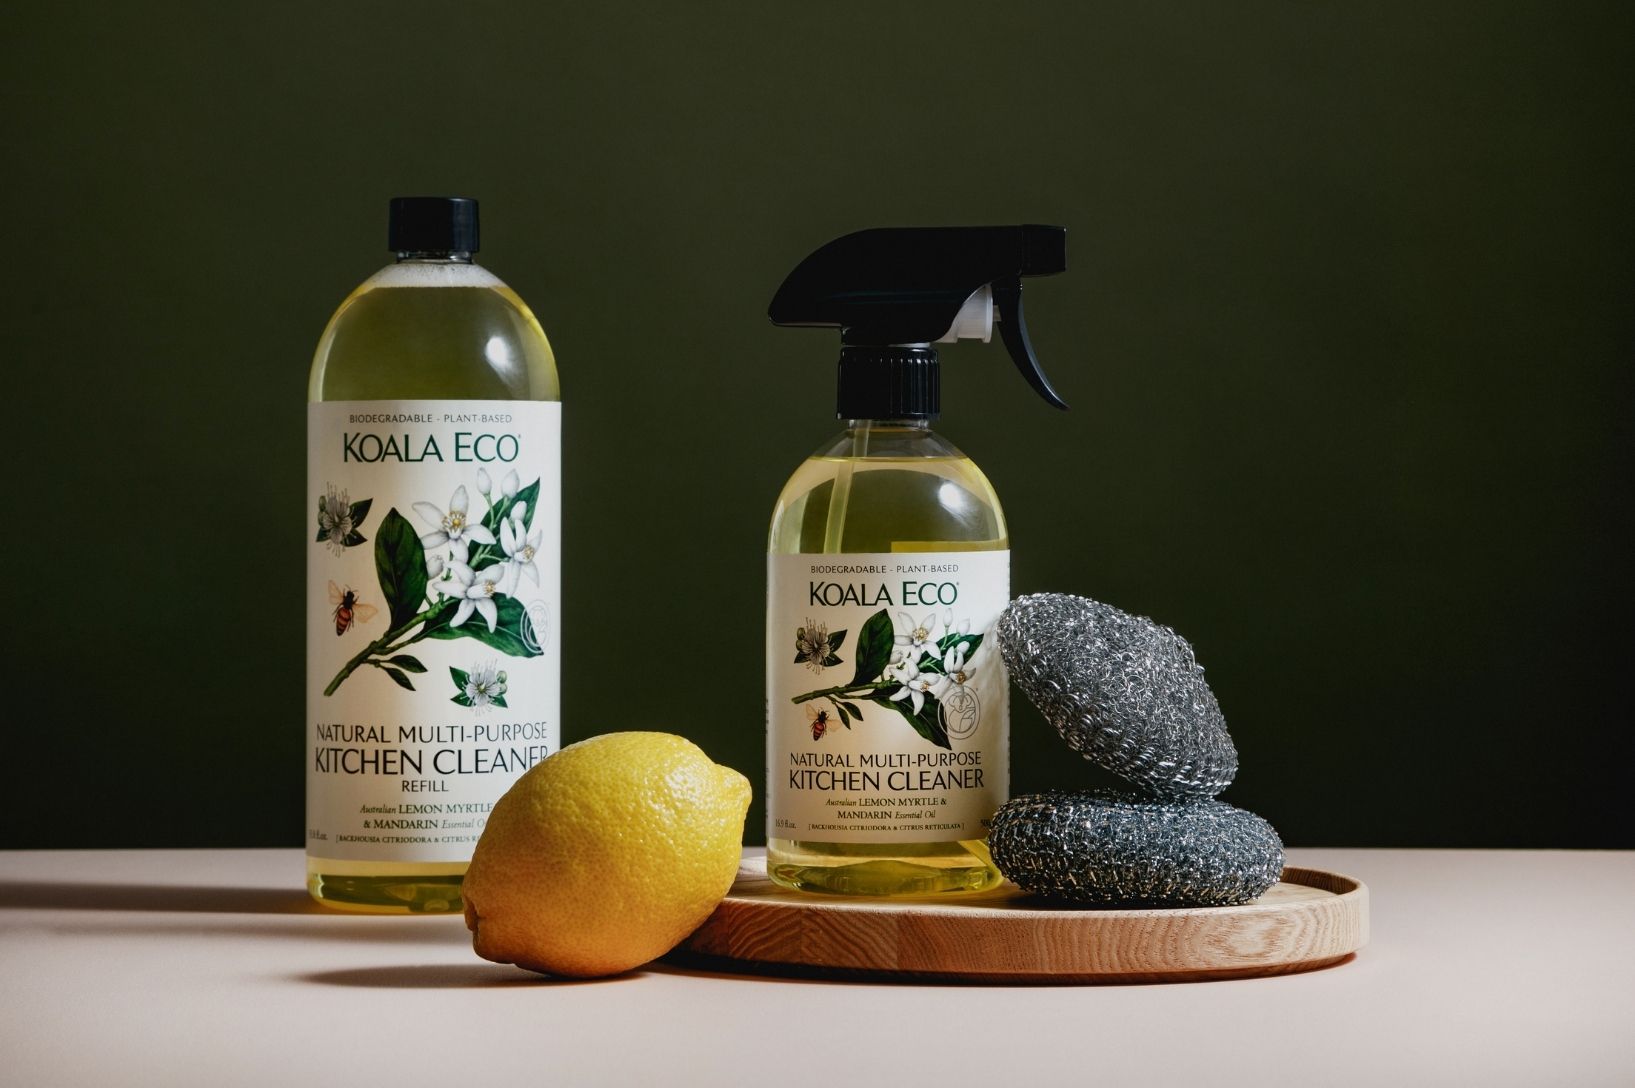 Natural, Non-Toxic Australian Cleaning Products That Actually Work